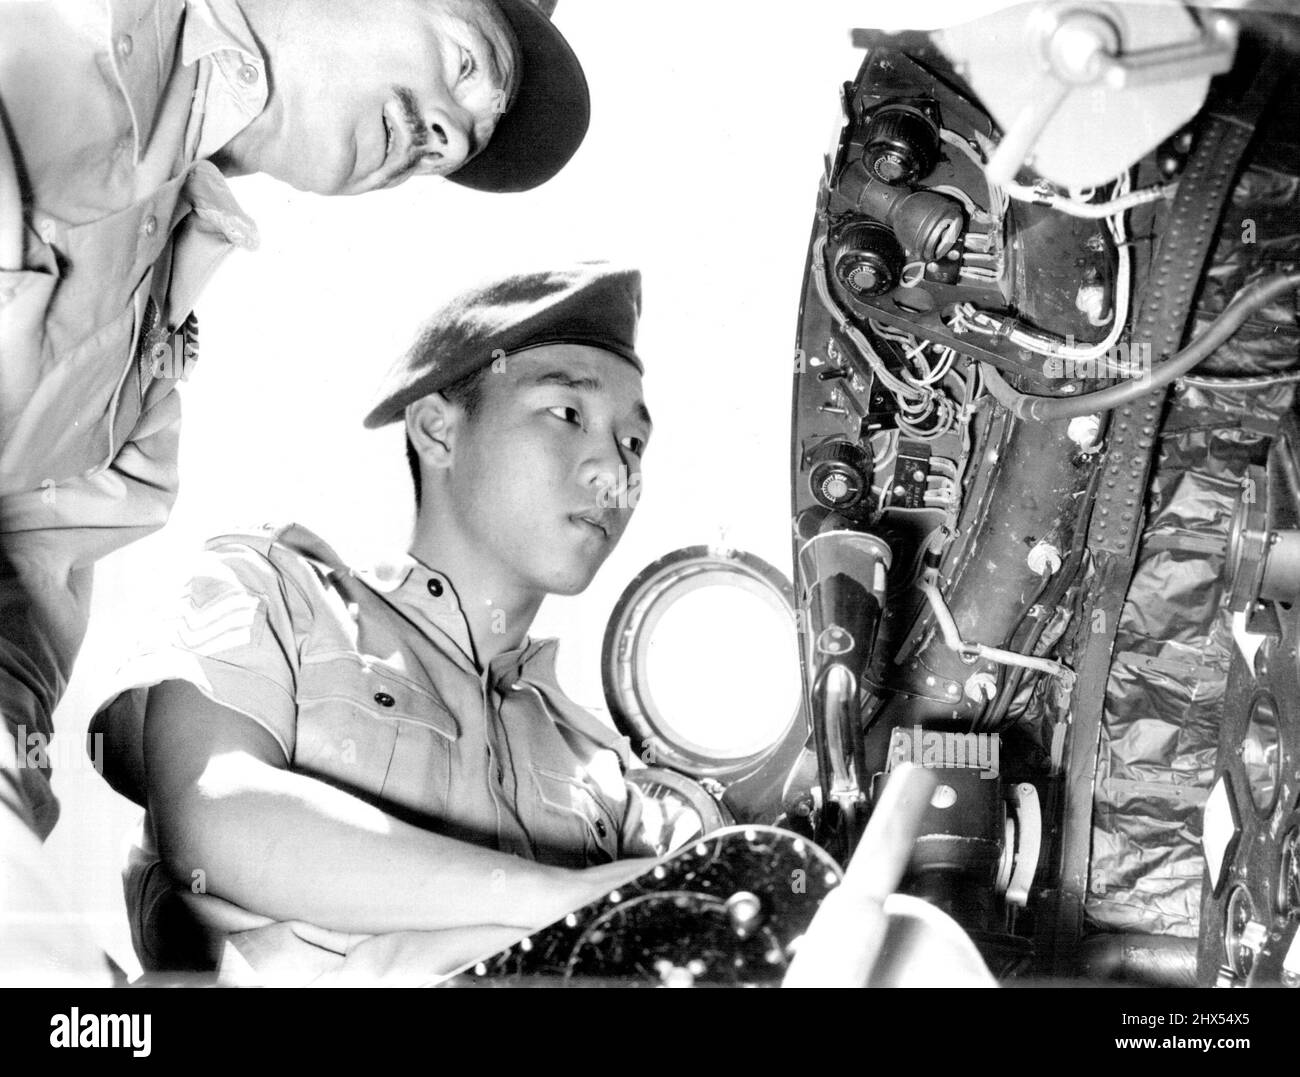 Pre-Look For Cadet. Flight Lieut. G. C. Turnbridge, No. 2 RAAF Squadron at amberley, shows Chinese Cadet Raymond Lam, who is nothing Australia with the Federation of Malaya. An training corps over a Canberra jet former Canberra will go into operation in Malaya next month. January 14, 1955. Stock Photo